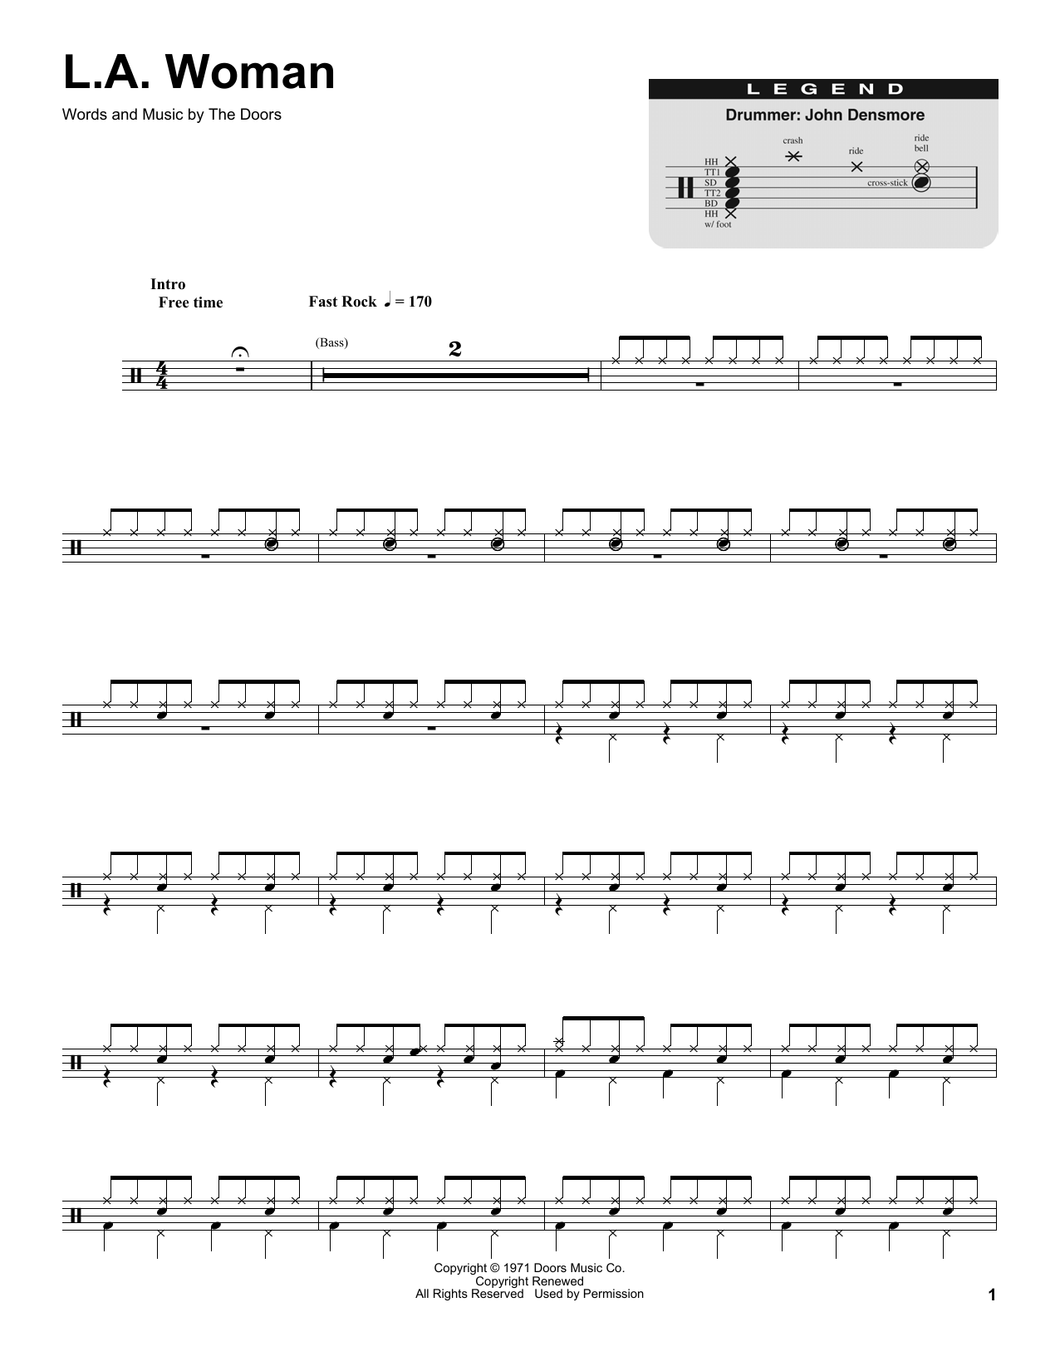 L.A. Woman - The Doors - Full Drum Transcription / Drum Sheet Music - SheetMusicDirect DT